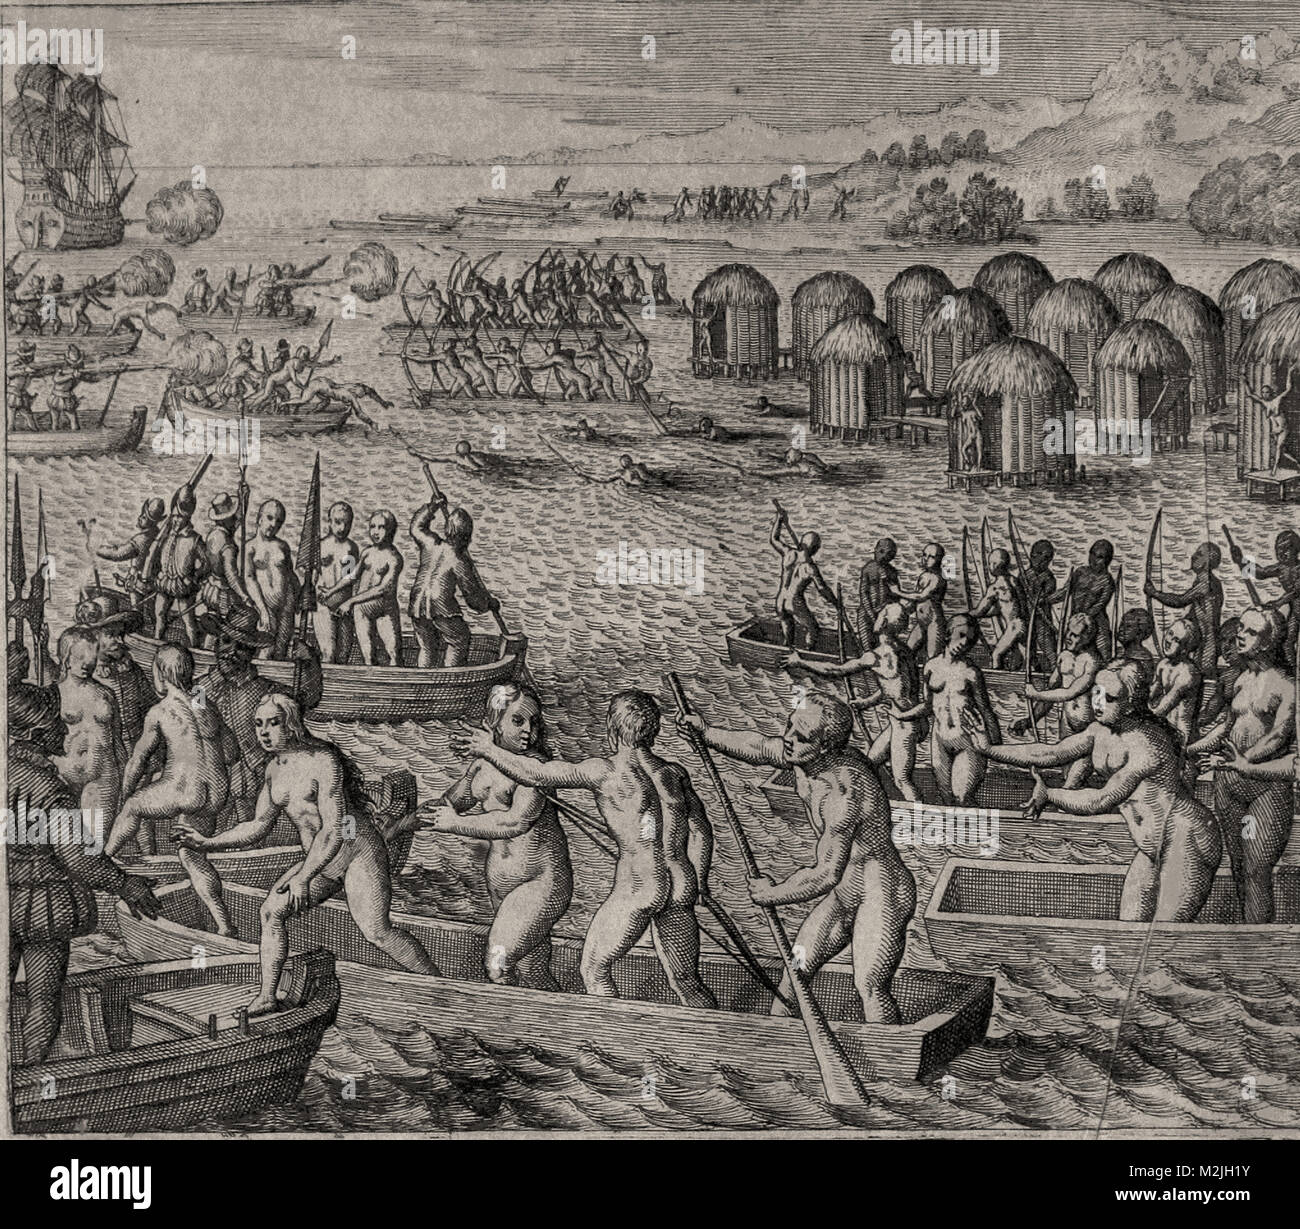 Theodor de Bry - Engraving of Indians Distracting the Spanish with Women Stock Photo